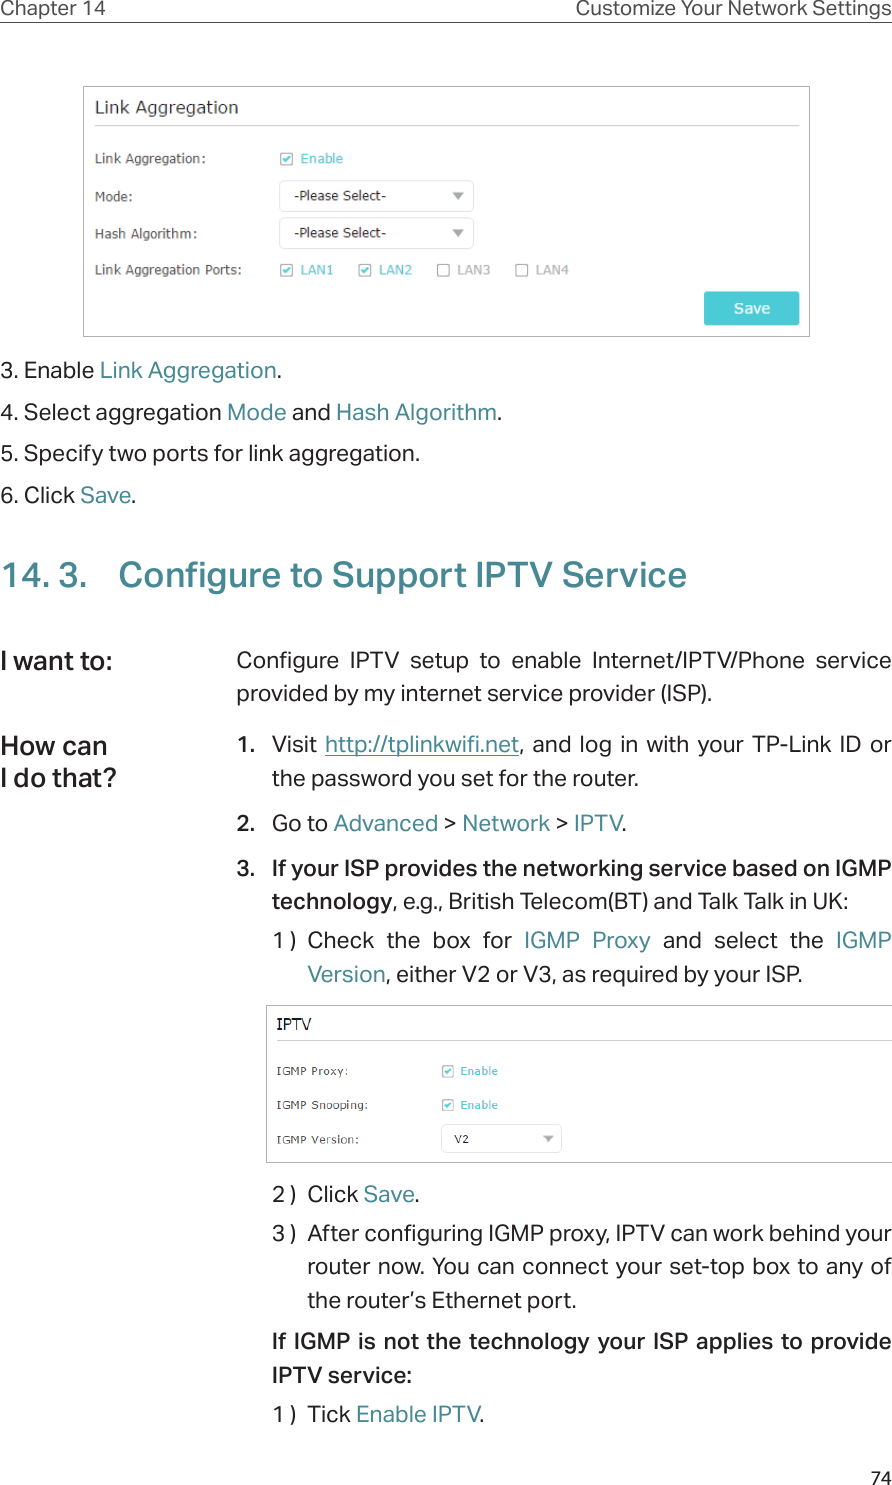 74Chapter 14 Customize Your Network Settings3. Enable Link Aggregation.4. Select aggregation Mode and Hash Algorithm.5. Specify two ports for link aggregation.6. Click Save.14. 3.  Configure to Support IPTV ServiceConfigure IPTV setup to enable Internet/IPTV/Phone service provided by my internet service provider (ISP).1.  Visit http://tplinkwifi.net, and log in with your TP-Link ID or the password you set for the router.2.  Go to Advanced &gt; Network &gt; IPTV.3.  If your ISP provides the networking service based on IGMP technology, e.g., British Telecom(BT) and Talk Talk in UK:1 )  Check the box for IGMP Proxy and select the IGMP Version, either V2 or V3, as required by your ISP.2 )  Click Save.3 )  After configuring IGMP proxy, IPTV can work behind your router now. You can connect your set-top box to any of the router’s Ethernet port.If IGMP is not the technology your ISP applies to provide IPTV service:1 )  Tick Enable IPTV.I want to:How can I do that?